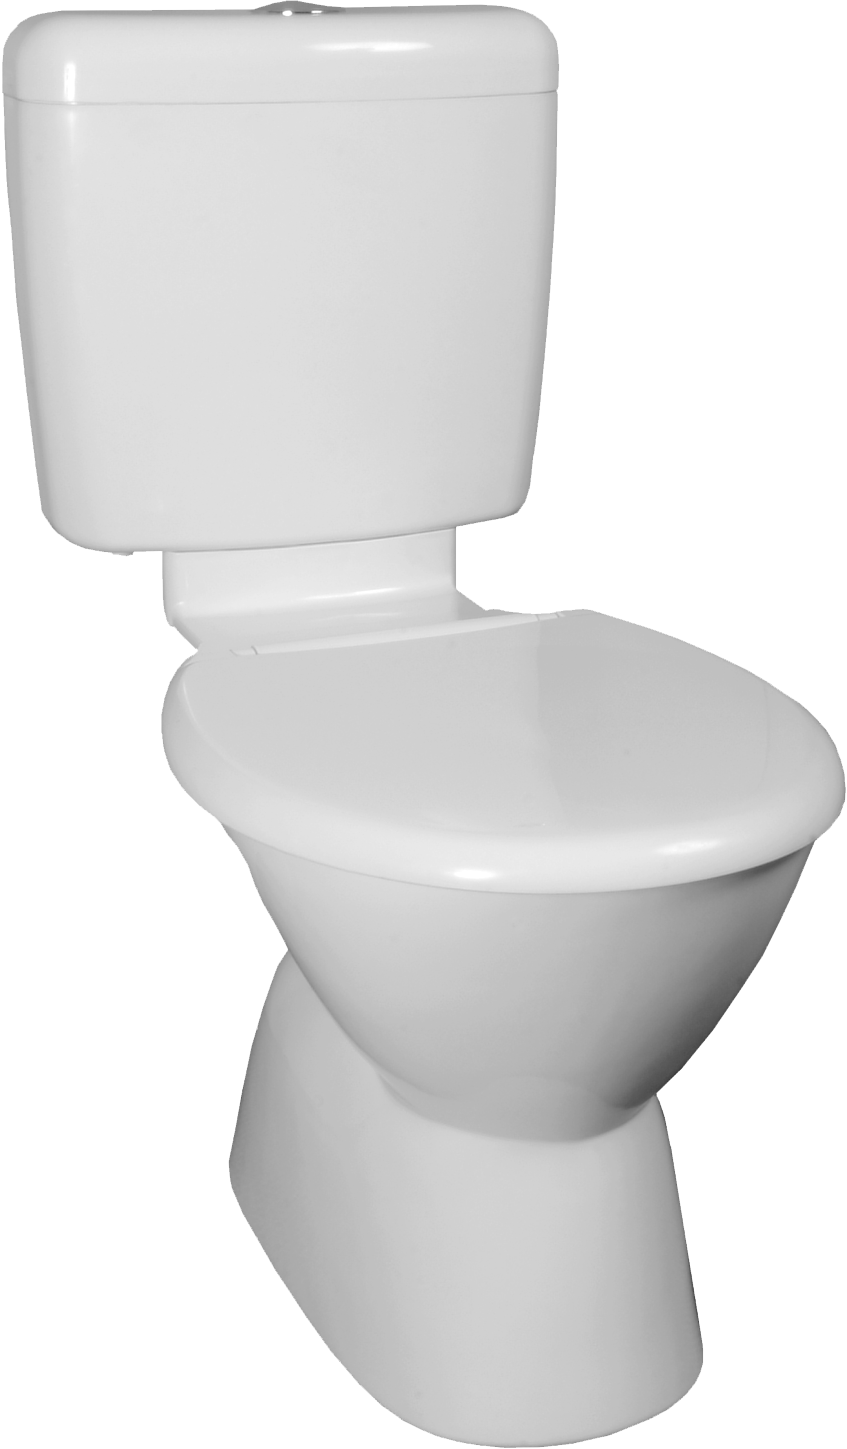 JOHNSON SUISSE CIVIC DELUXE TOILET GLOSS WHITE